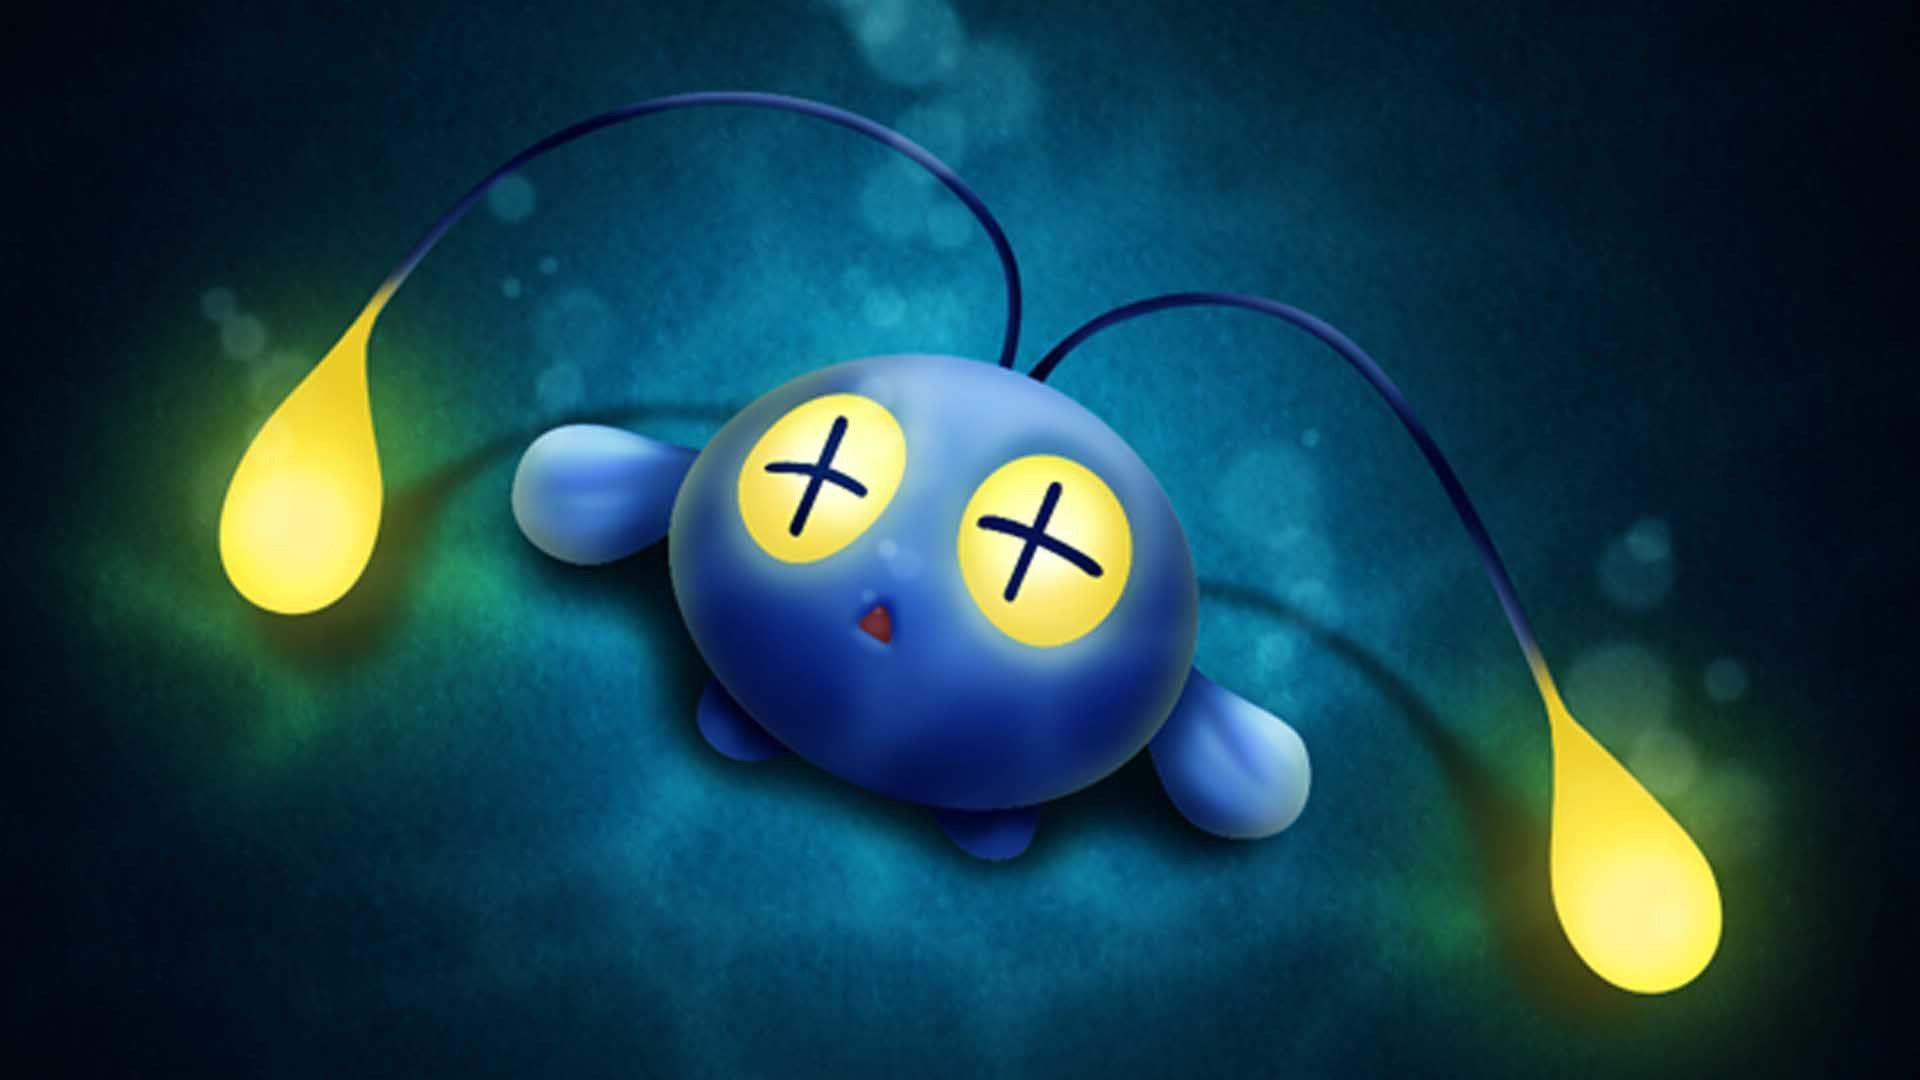 Chinchou Wallpaper Image Photo Picture Background